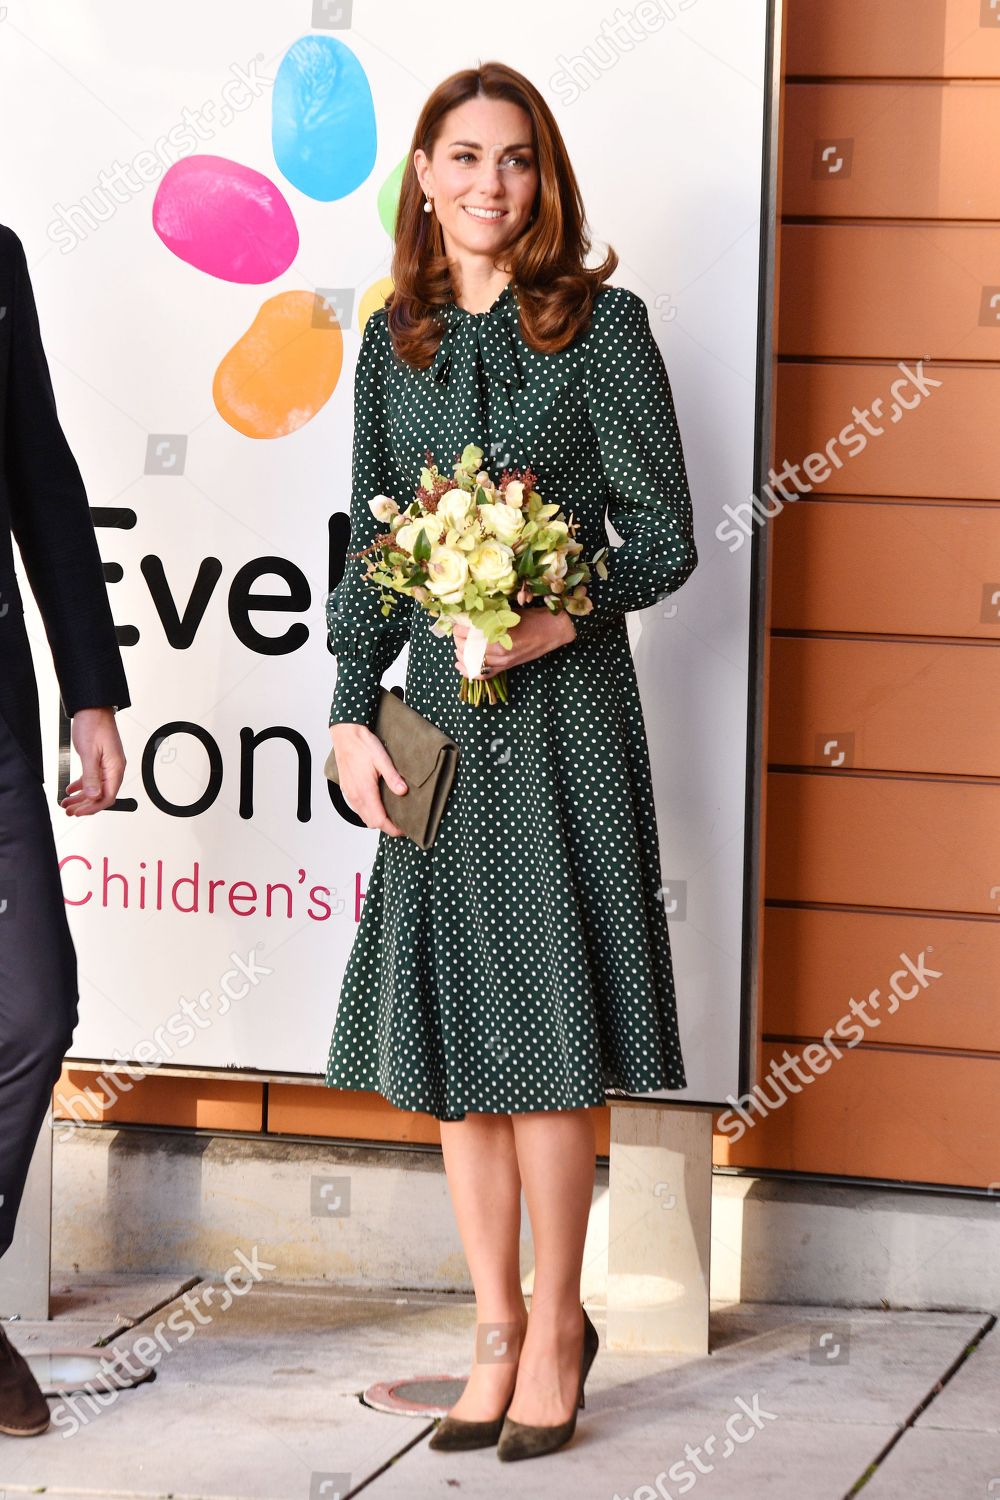 prince-william-and-catherine-duchess-of-cambridge-visit-to-evelina-children-s-hospital-london-uk-shutterstock-editorial-10024586d.jpg